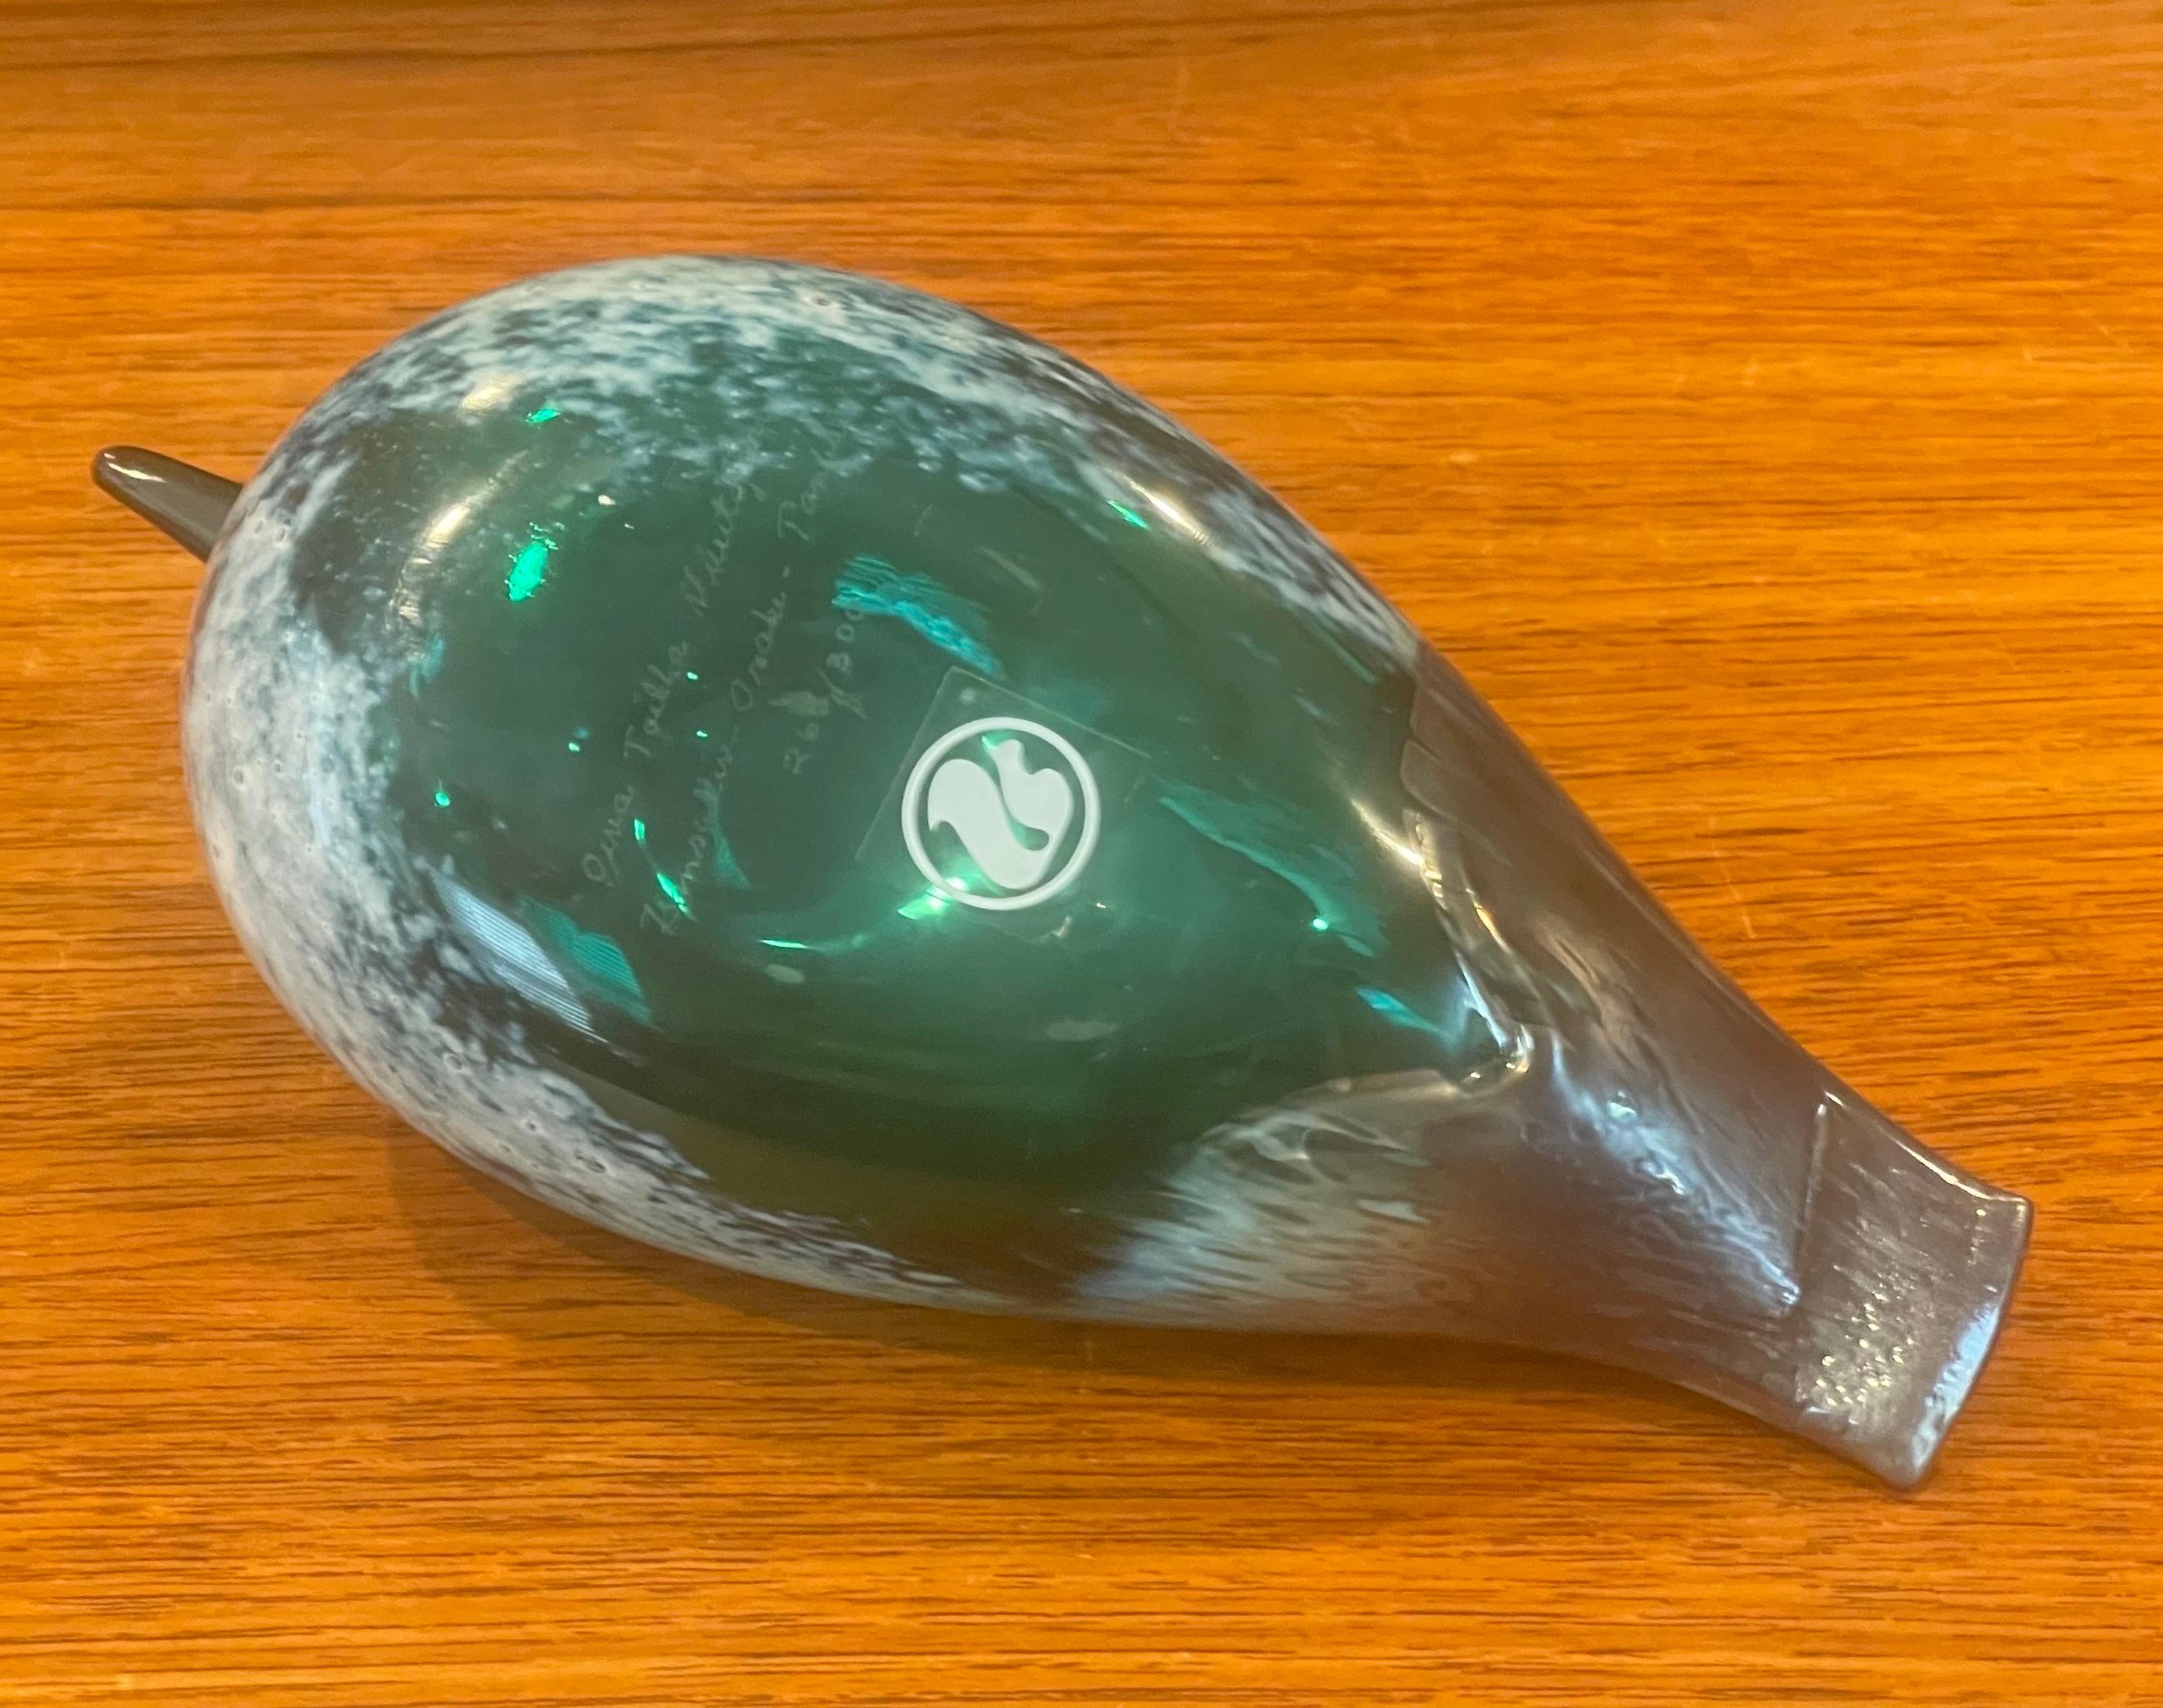 Limited Edition Art Glass Bird Sculpture by Oiva Toikka / Nuutajarvi of Finland For Sale 2